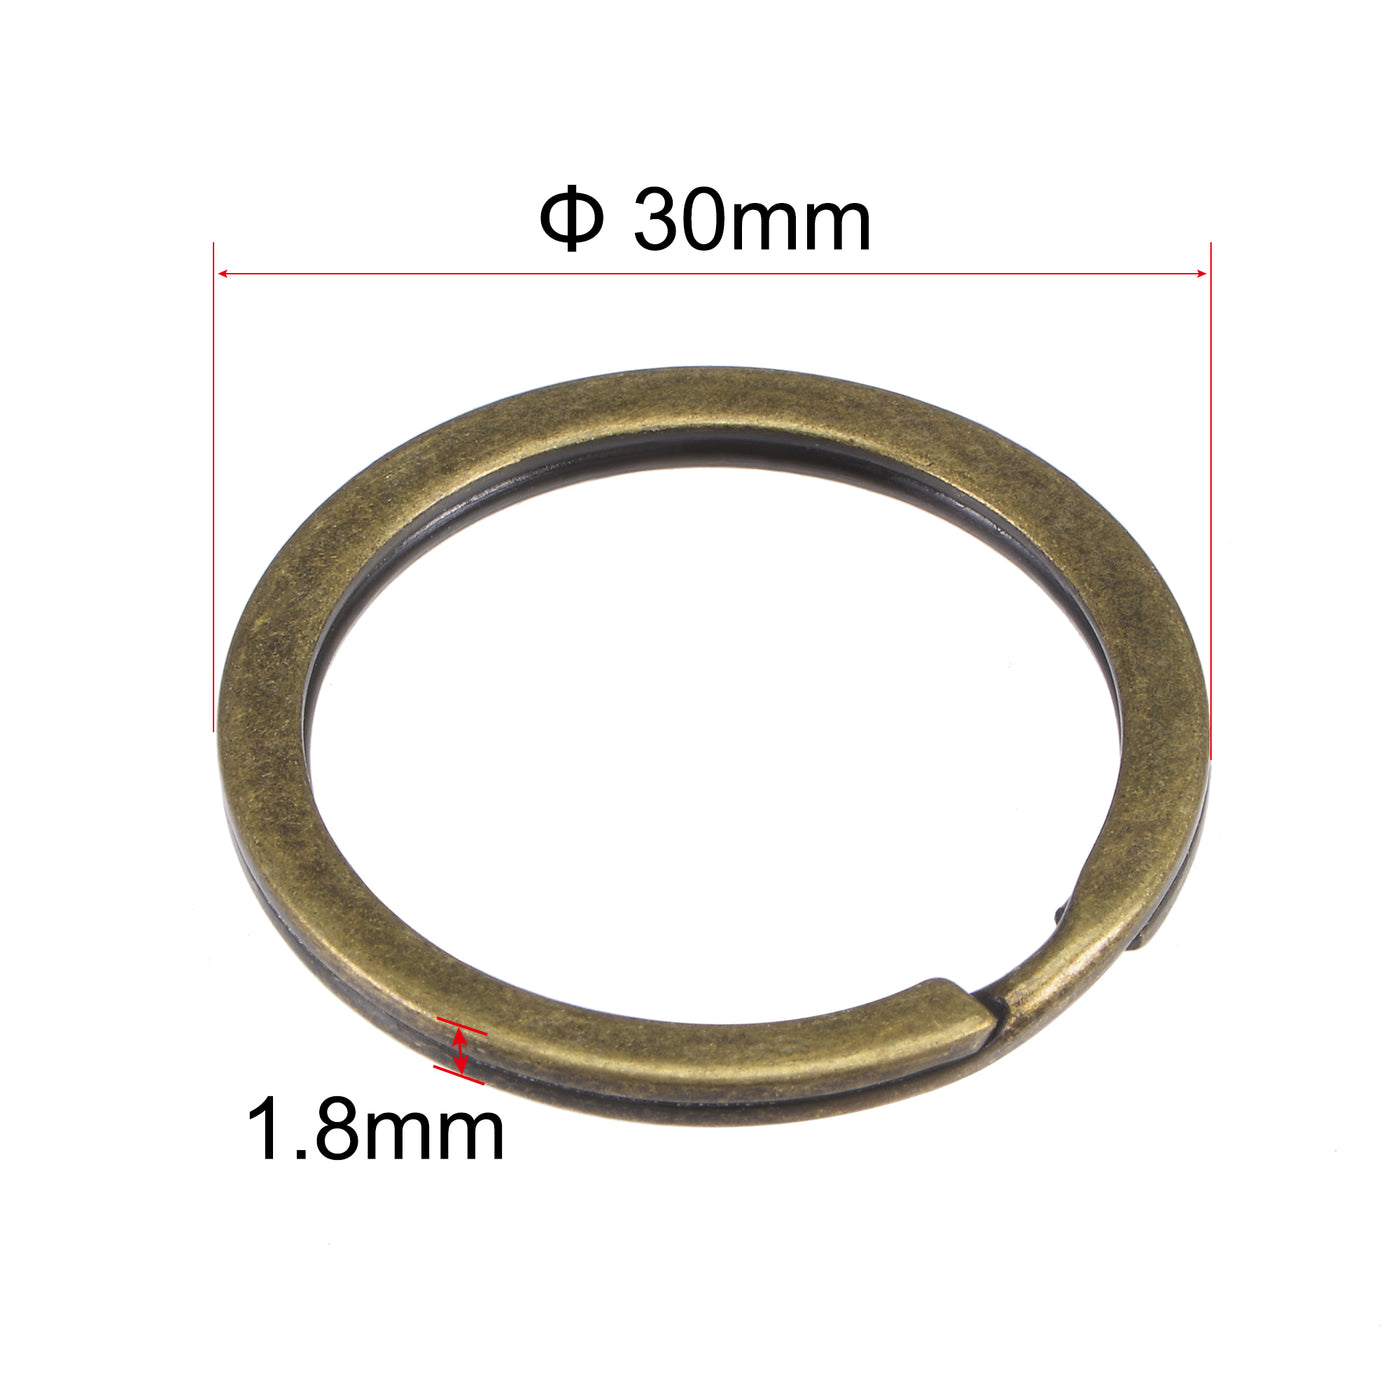 Uxcell Uxcell Split Key Ring 32mm Open Flat Jump Connector for Lanyard Zipper Handbag, Electroplated Iron, Bronze Pack of 20